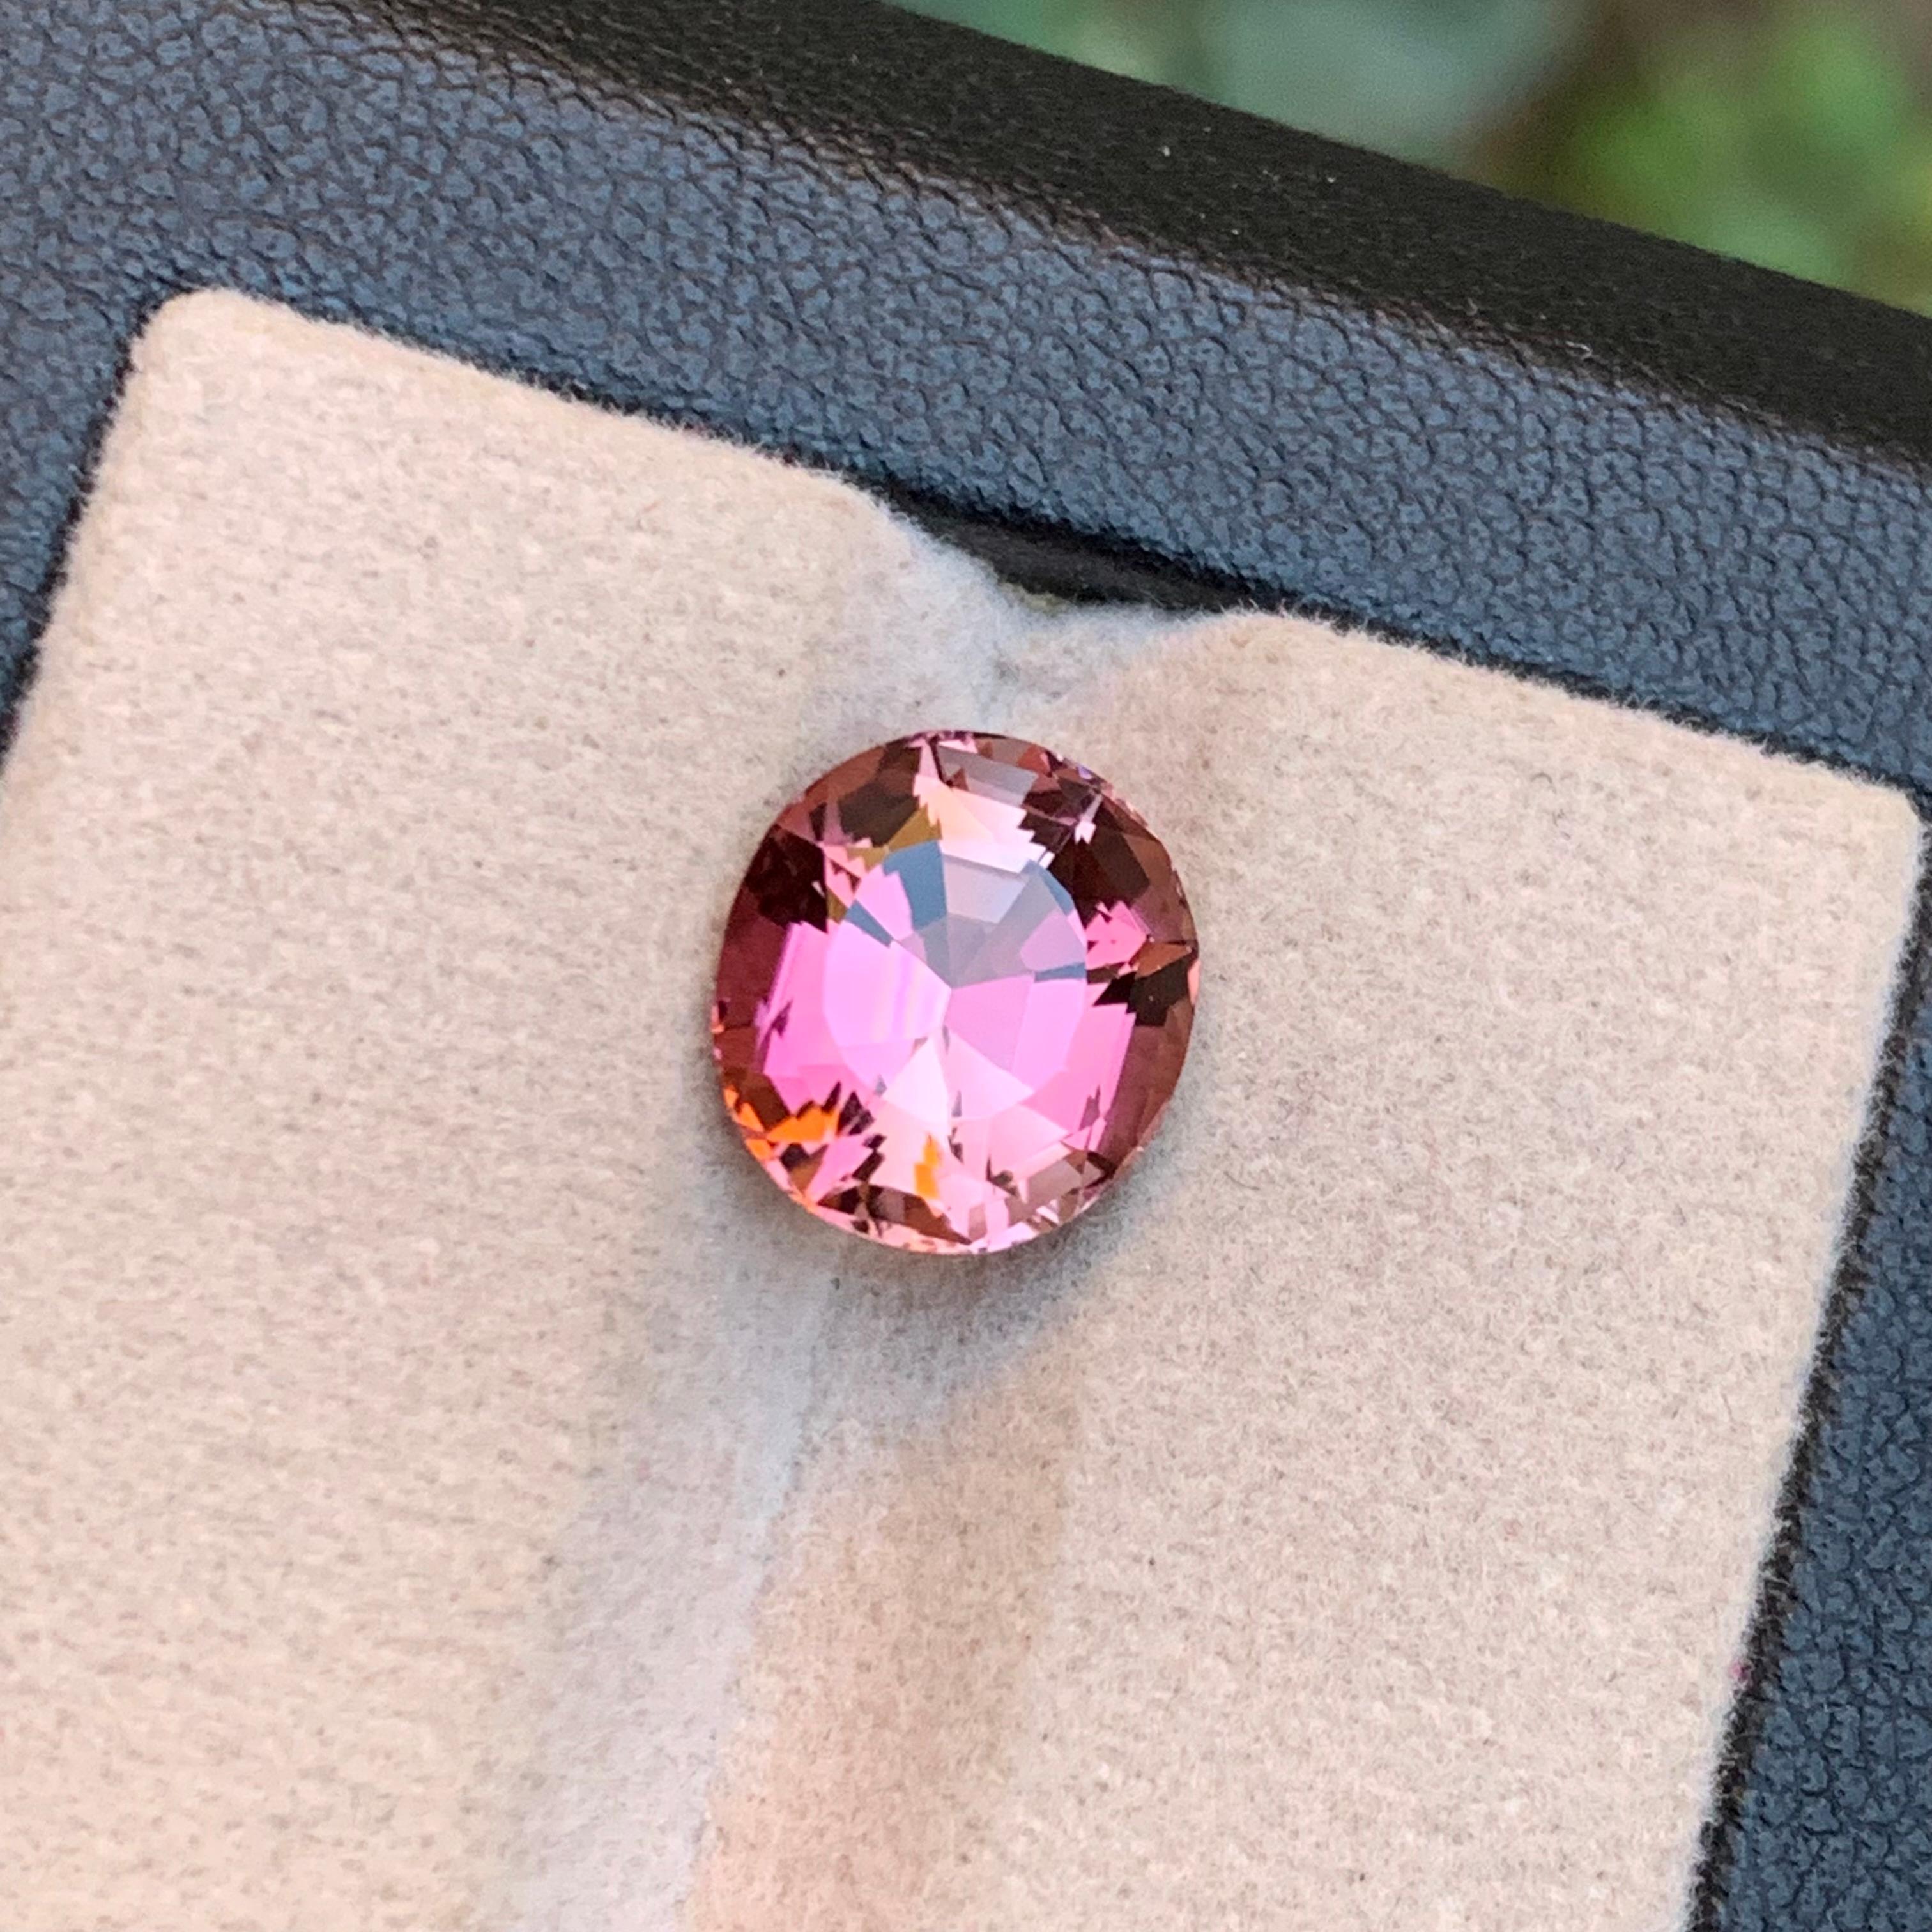 Rare Peachy Pink Natural Tourmaline Gemstone, 3.80 Ct Fancy Cushion Cut for Ring For Sale 3